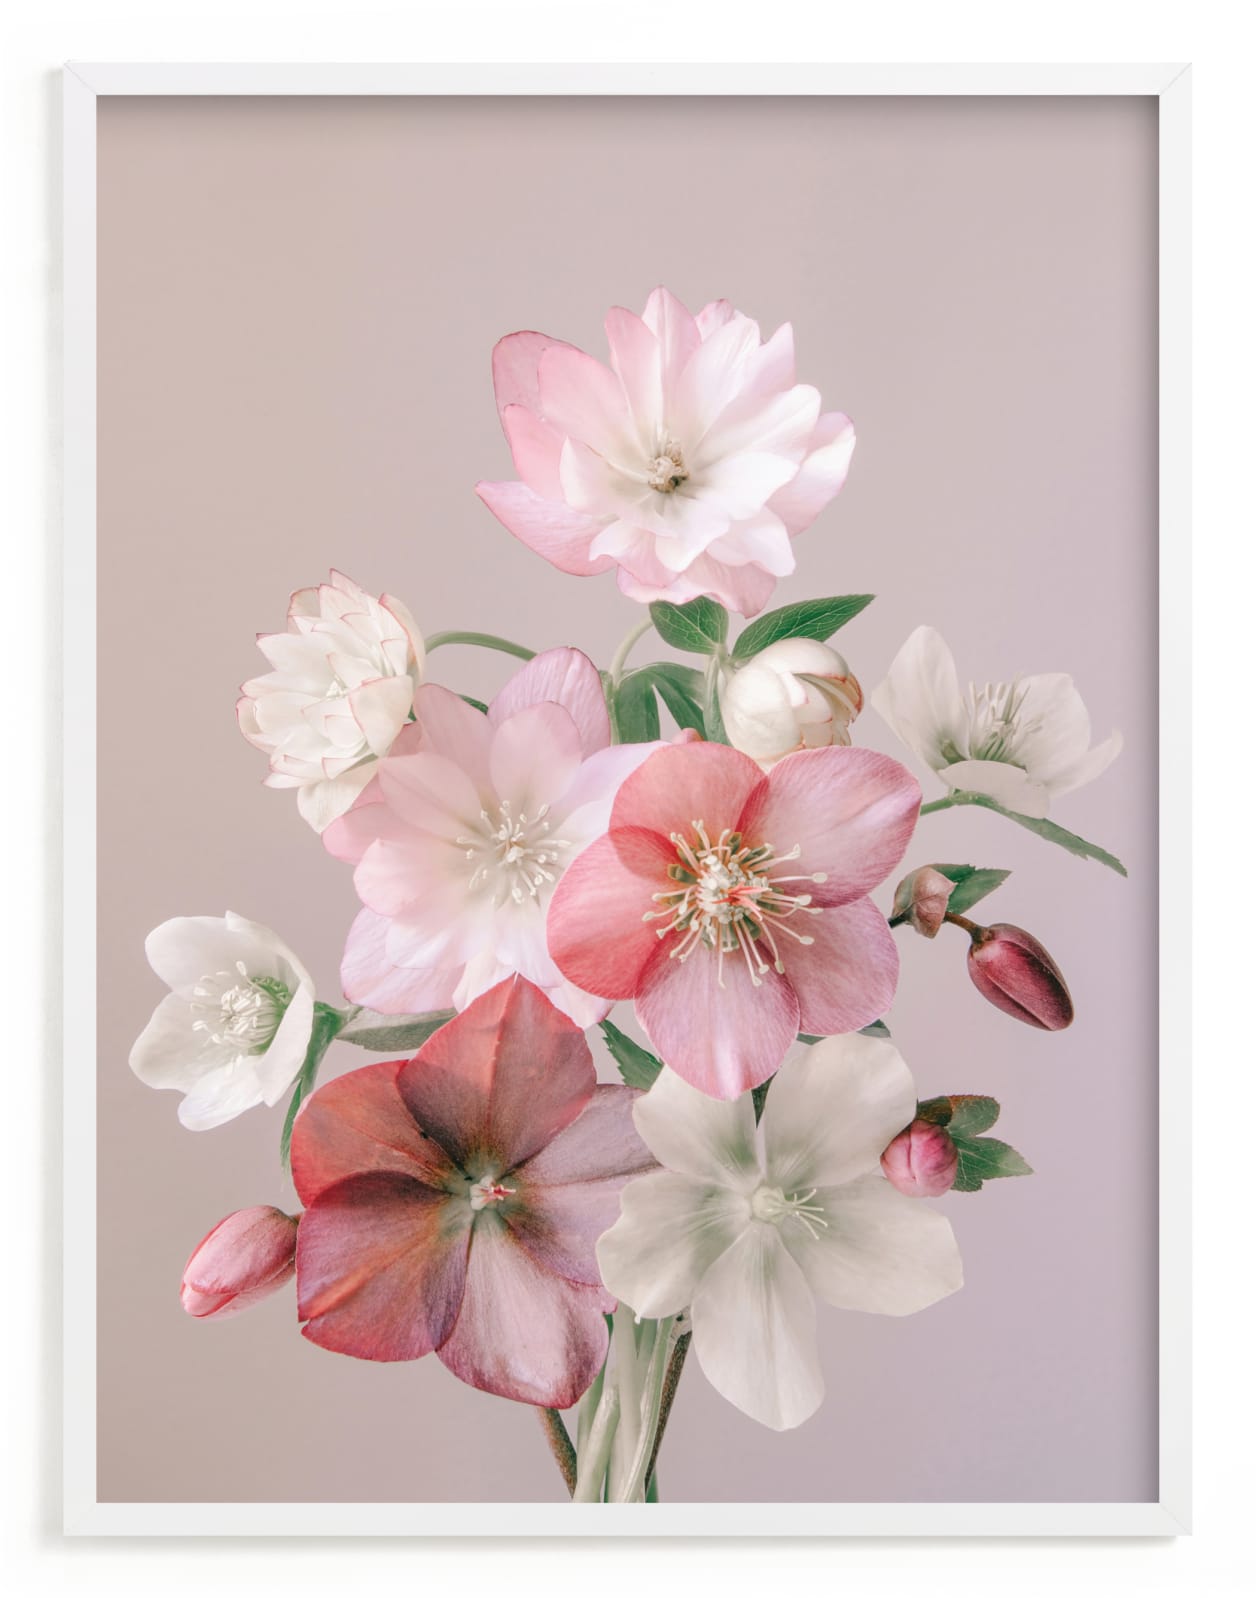 Shop Odet 30" X 40" MATTED WHITE WOOD FRAME from Minted on Openhaus